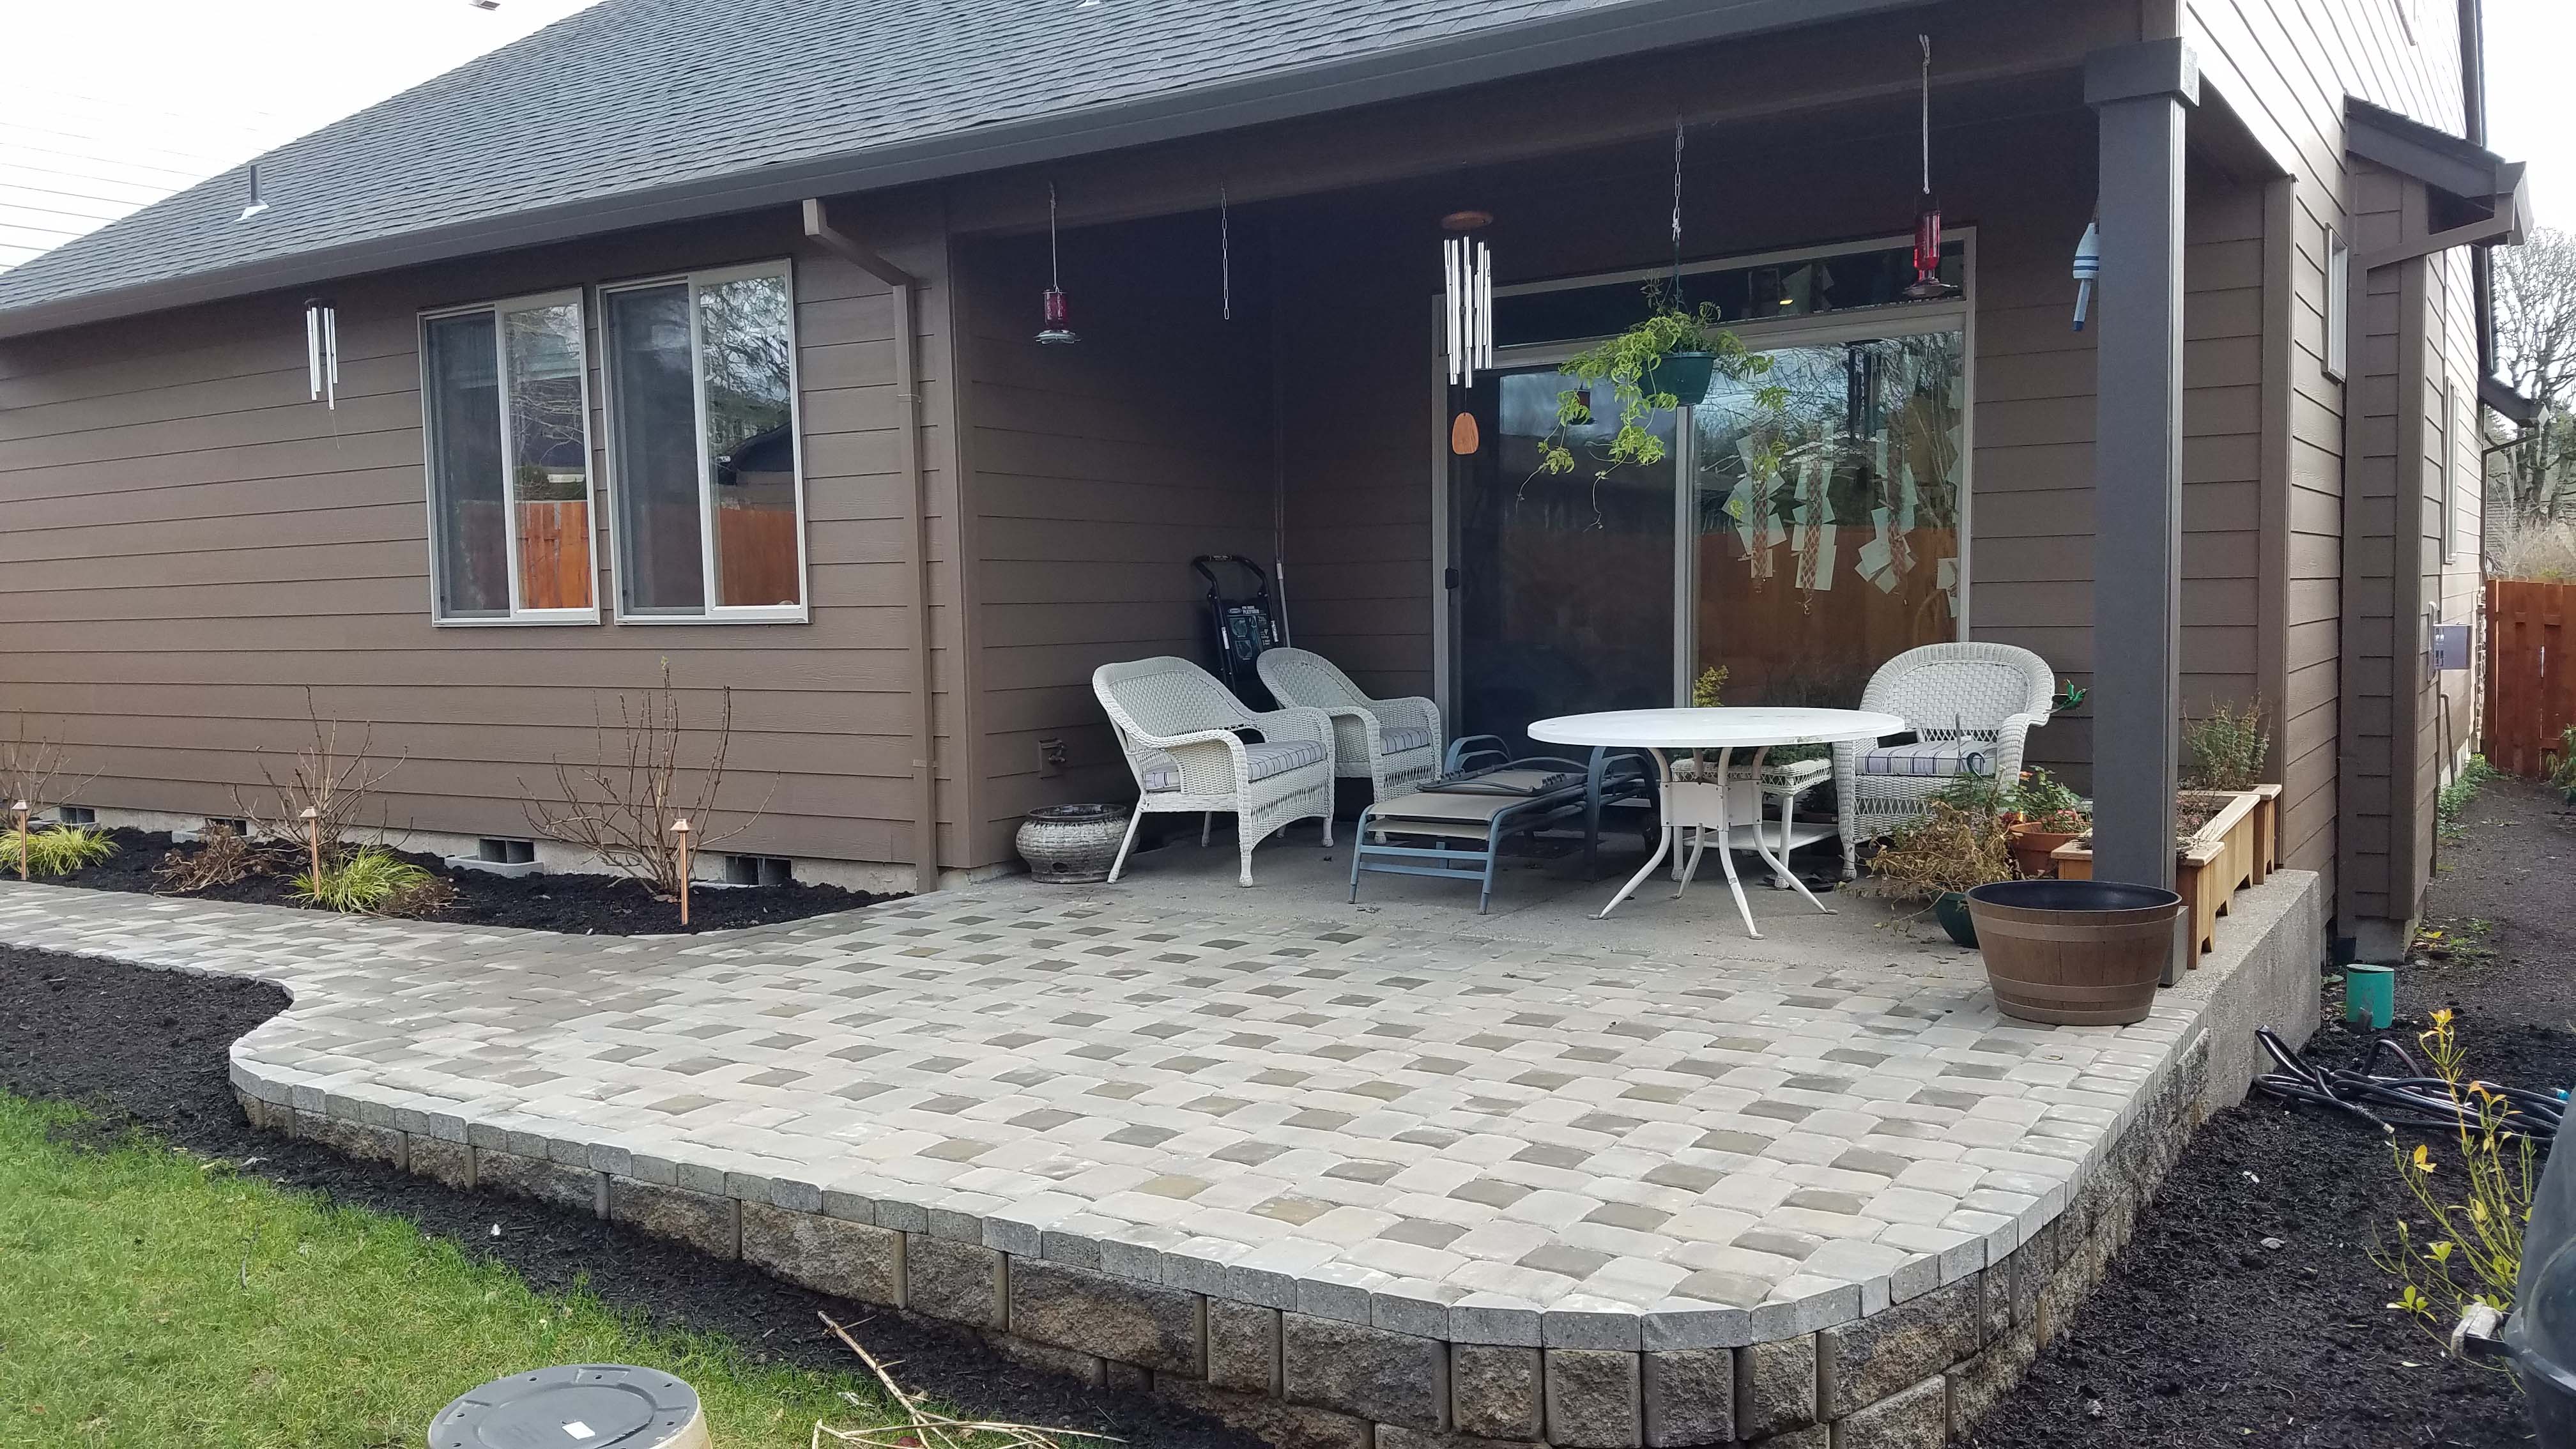 New back patio expansion with new brick path